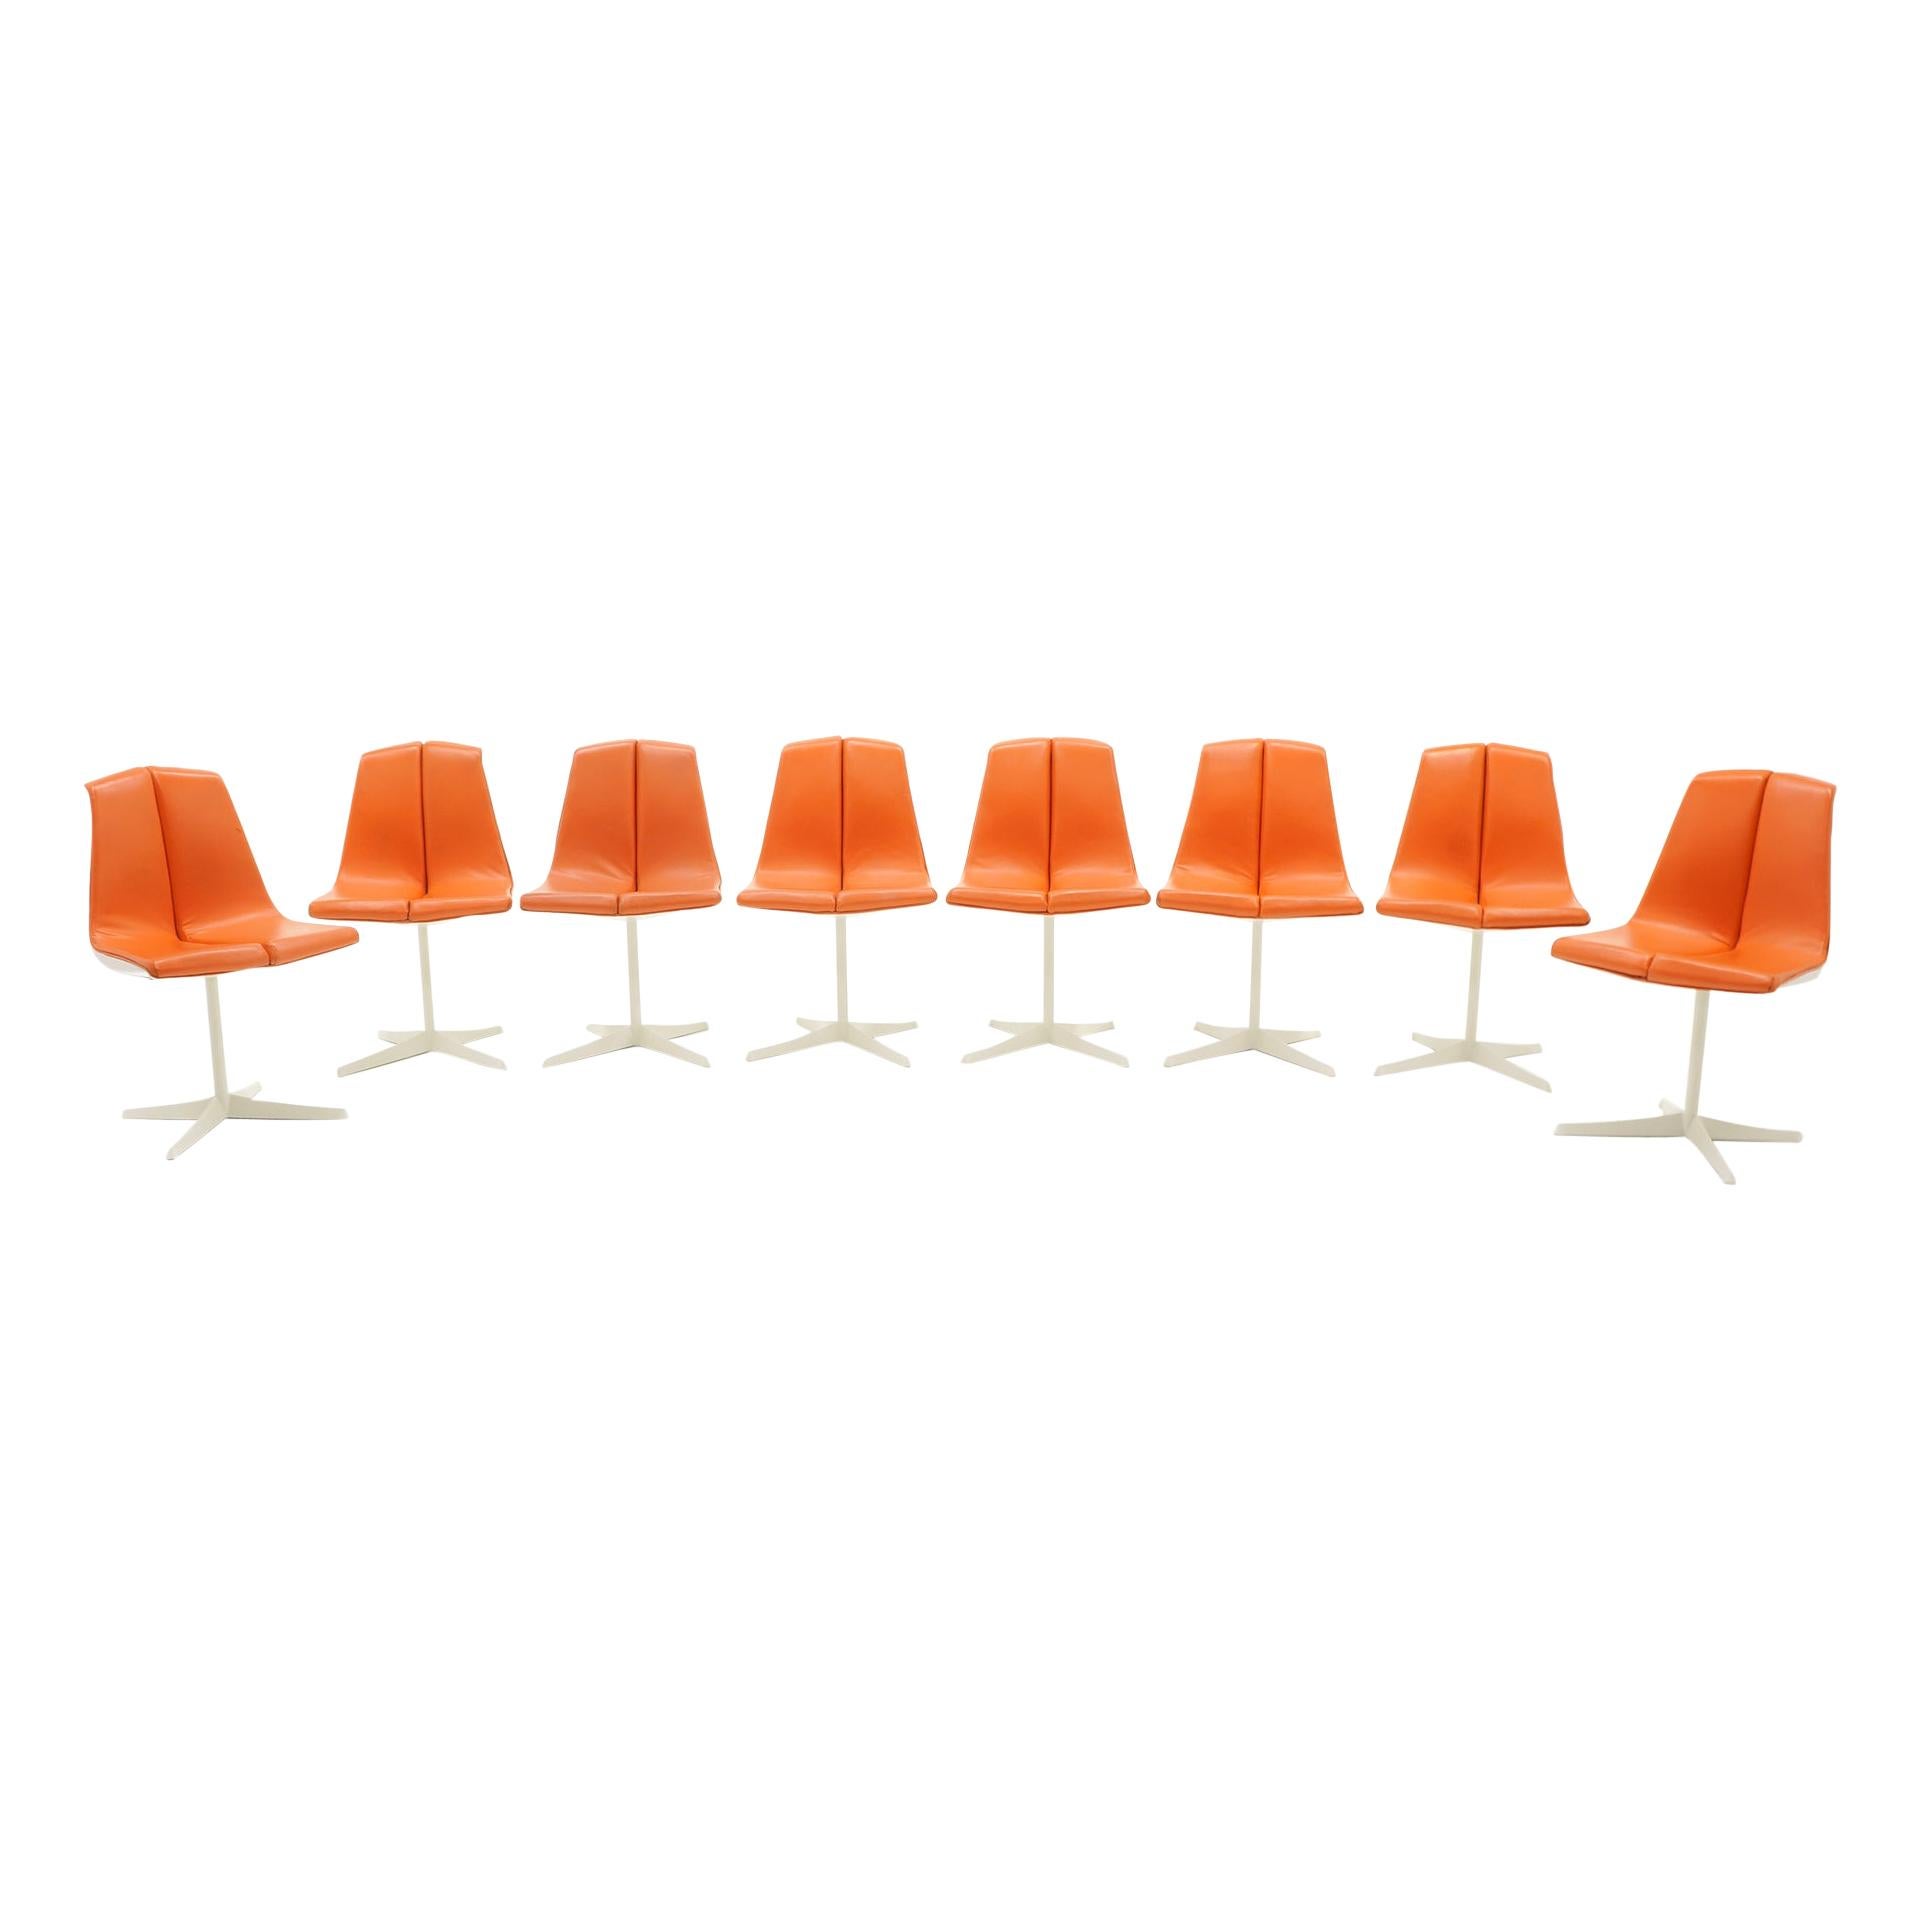 Eight Dining Chairs by Richard Schultz for Knoll. White Frames, Red Orange Seats